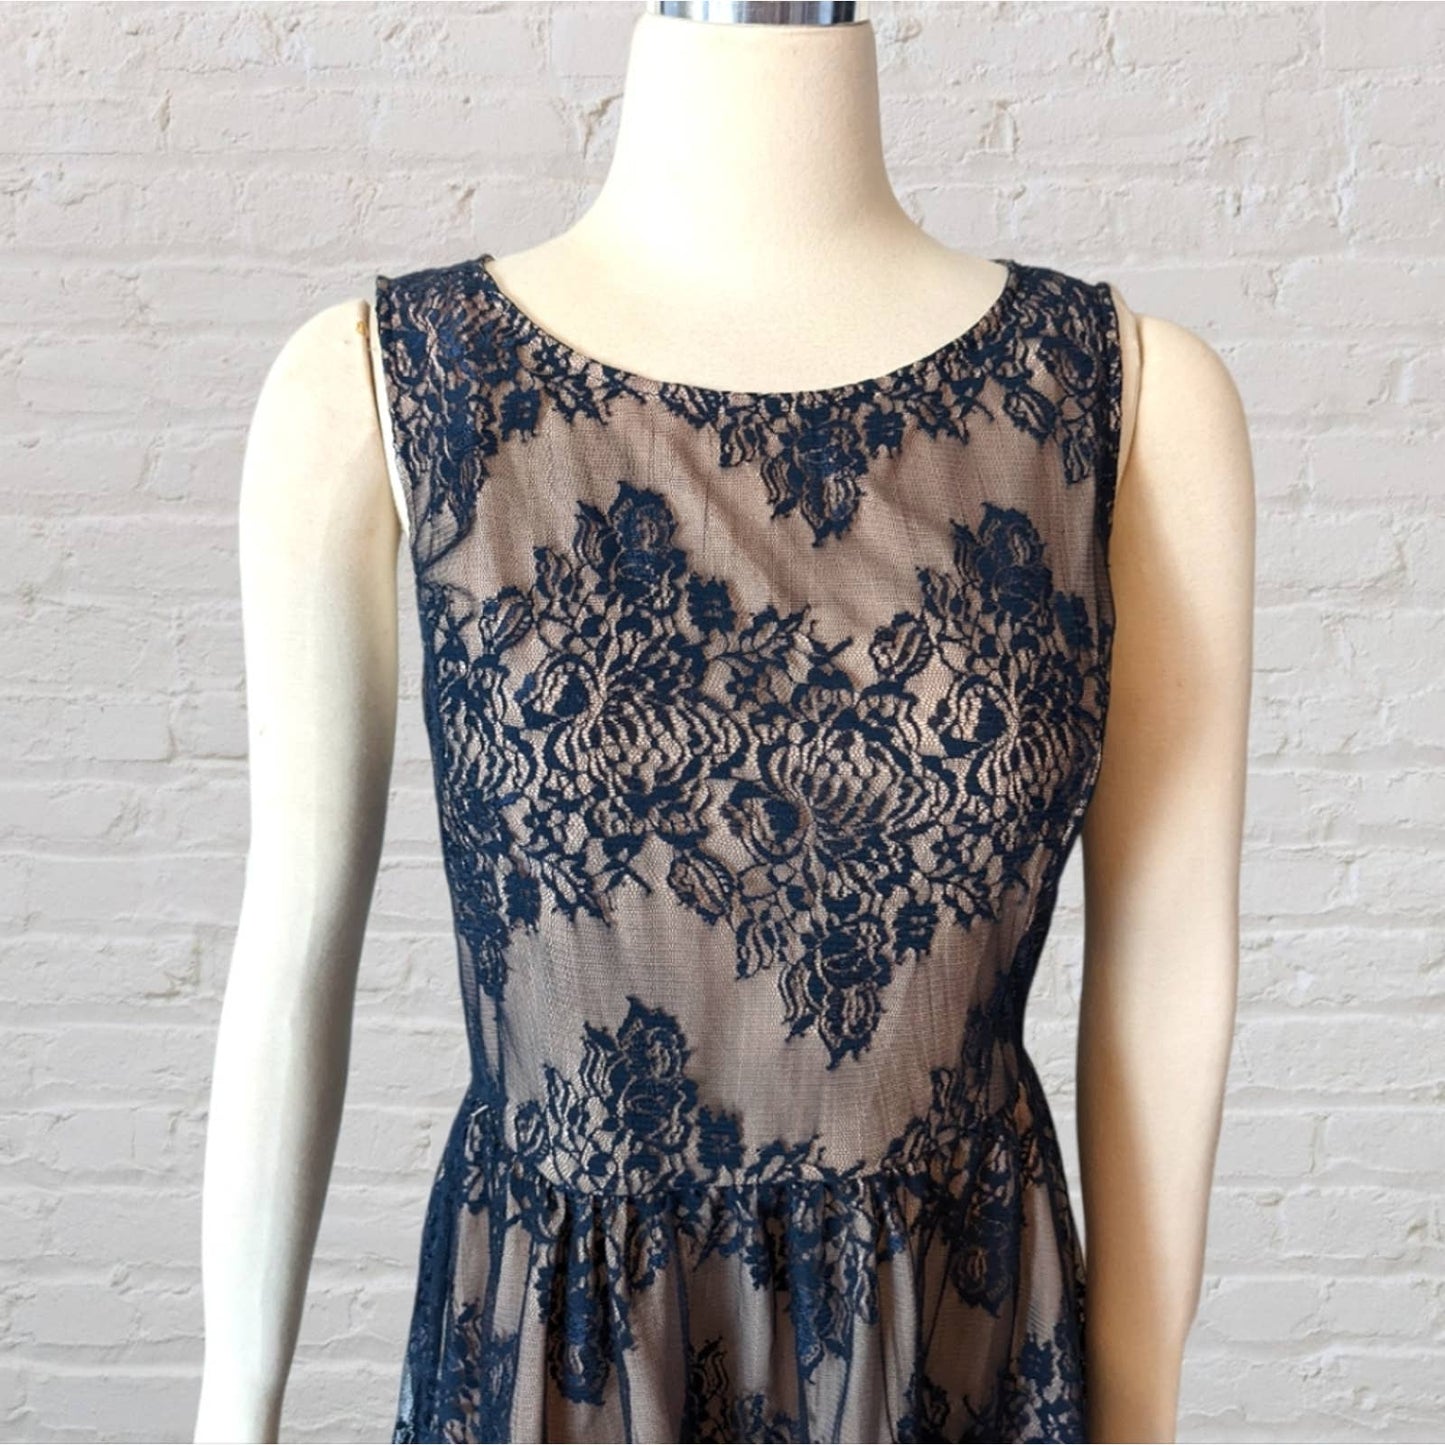 FOREVER 21 Navy Blue Lace Party Dress with Tan Lining Large